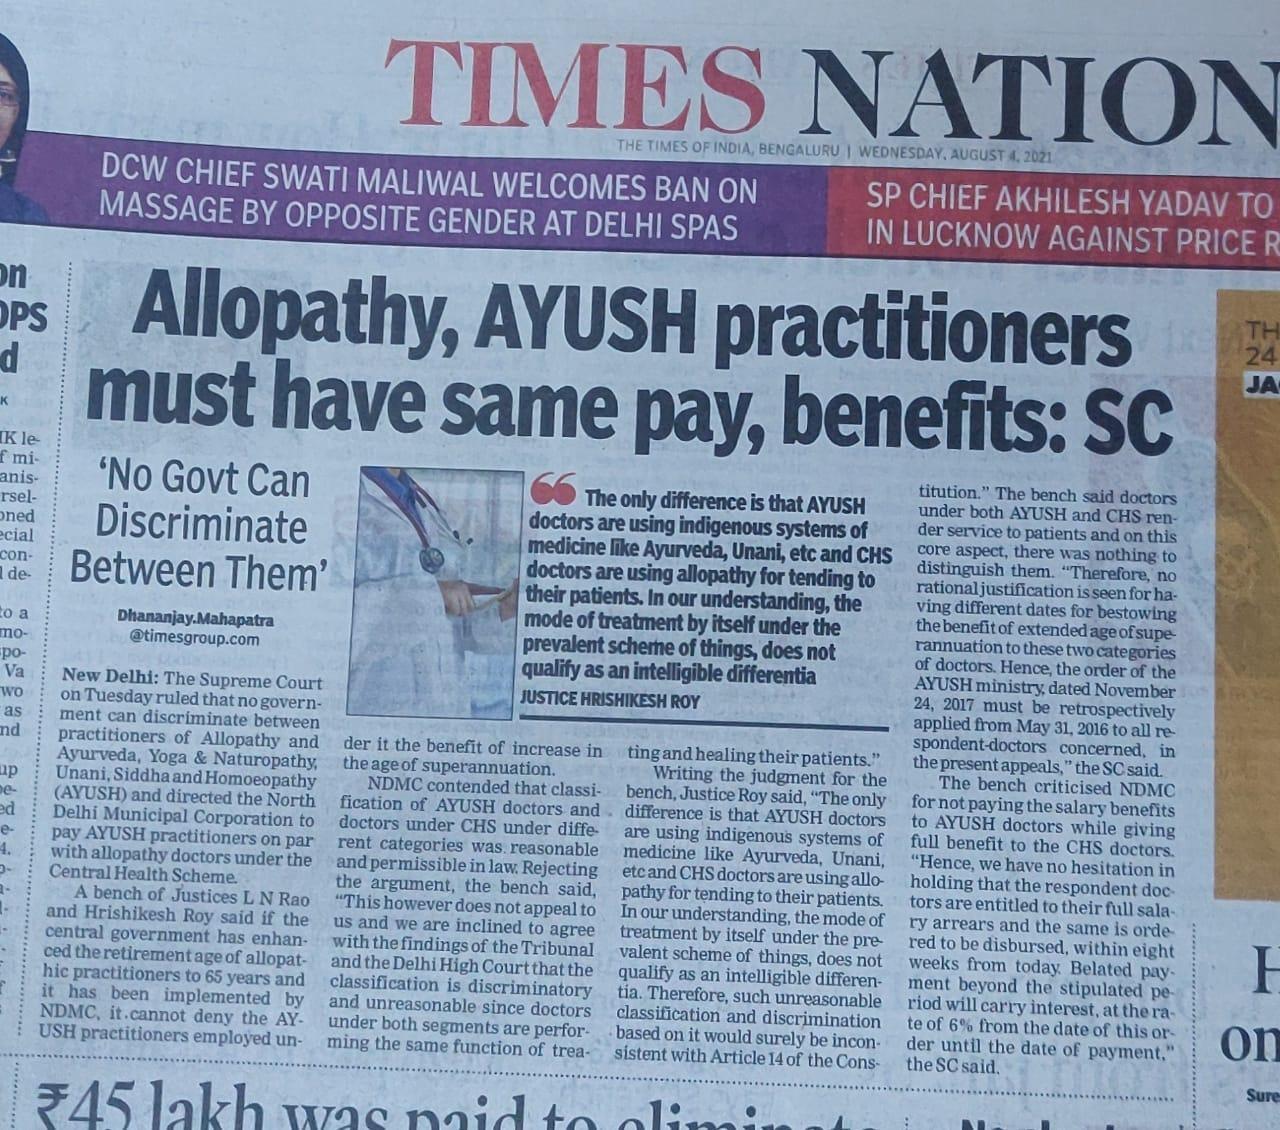 Allopathy, AYUSH Practitioners must have same pay, benefits : Supreme Court